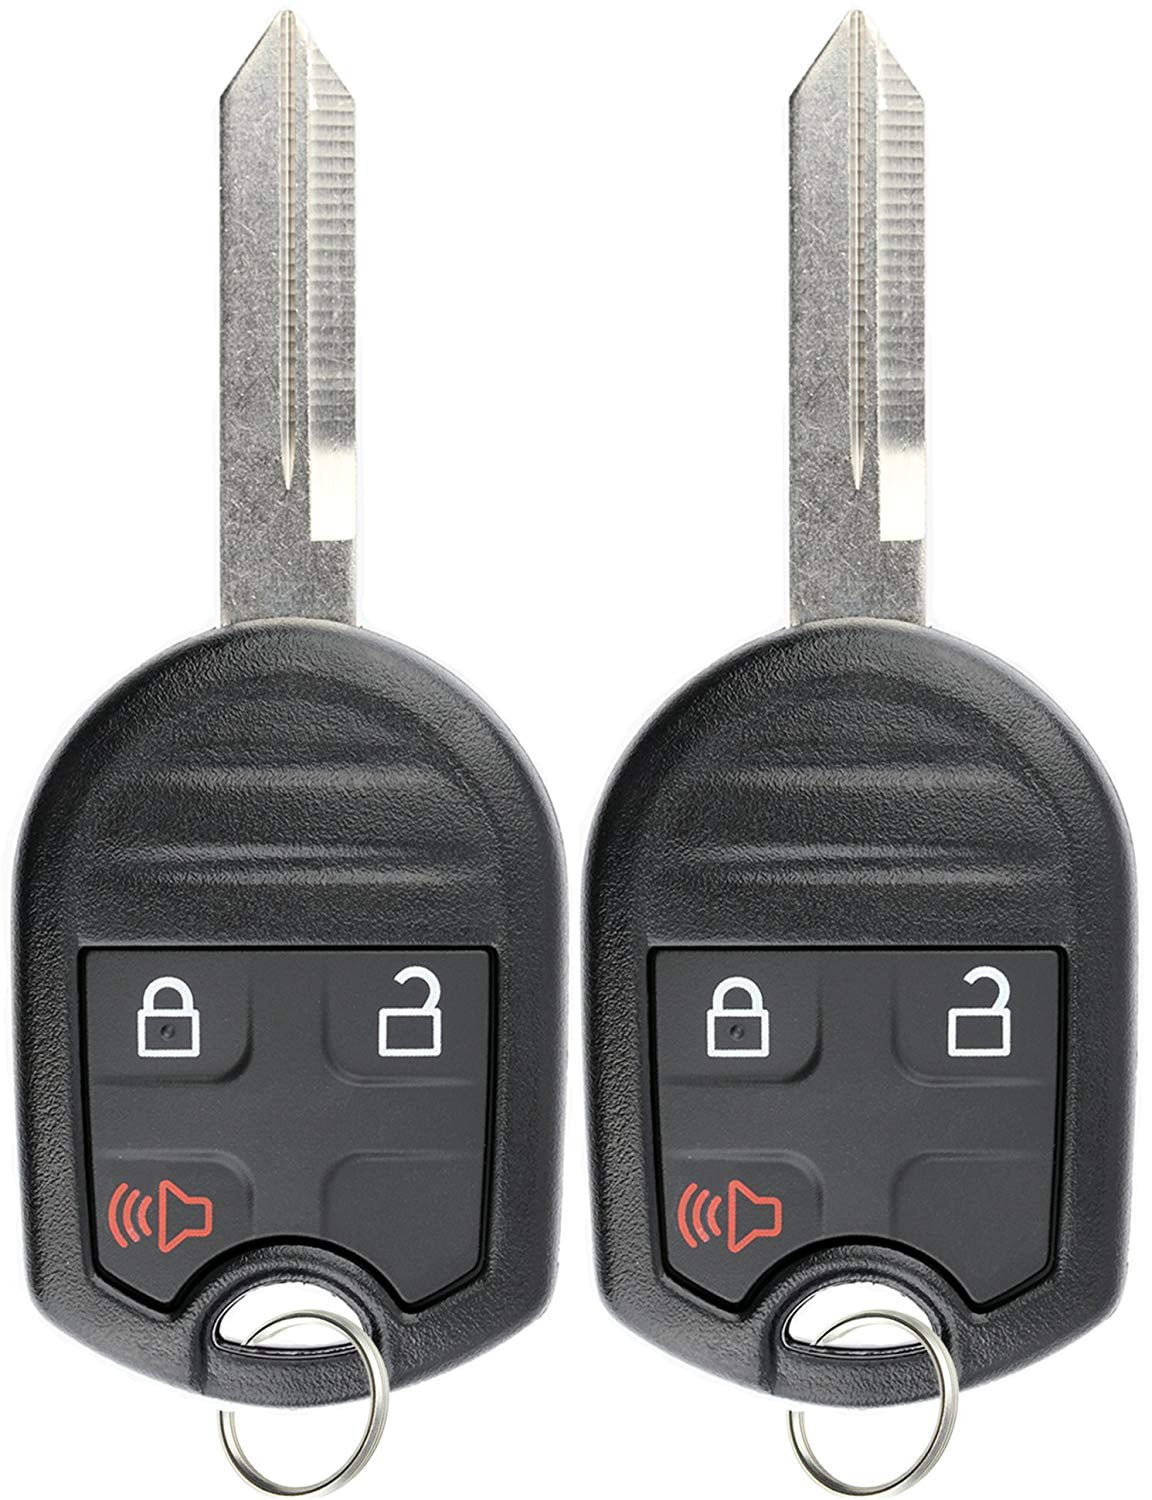 KeylessOption Keyless Remote Uncut Blank Car Smart Key Fob Case Shell Cover Housing For OHT01060512 Pack of 2 